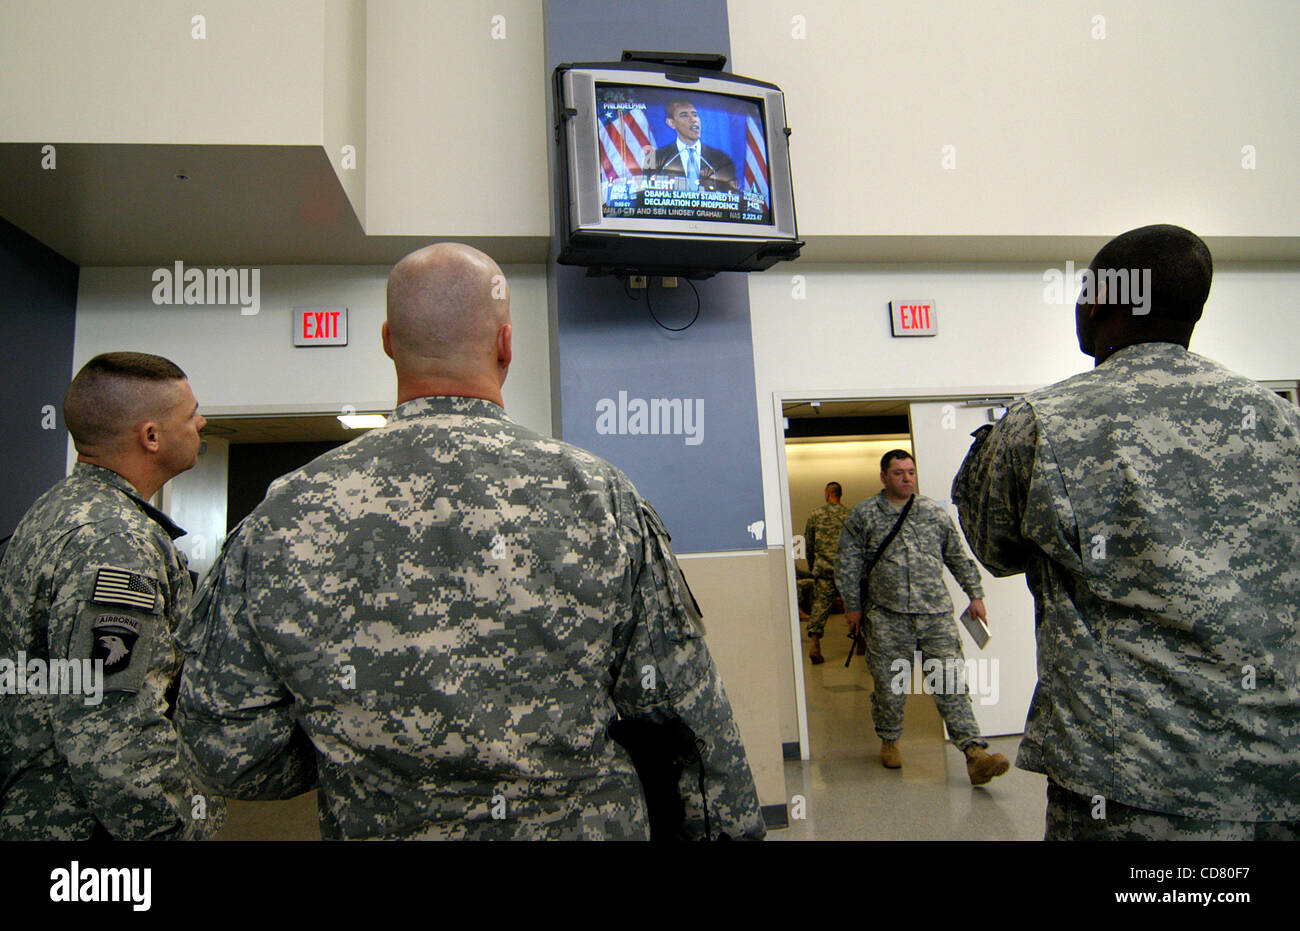 Mar 18, 2008 - Fort Campbell, Kentucky, USA - In the air head terminal at Fort Campbell, Ky, awaiting transportation for their fifteen-month deployment to Afghanistan in support of Operation Enduring Freedom, soldiers watch Barack Obama's speech explaining his relationship with his controversial Chi Stock Photo